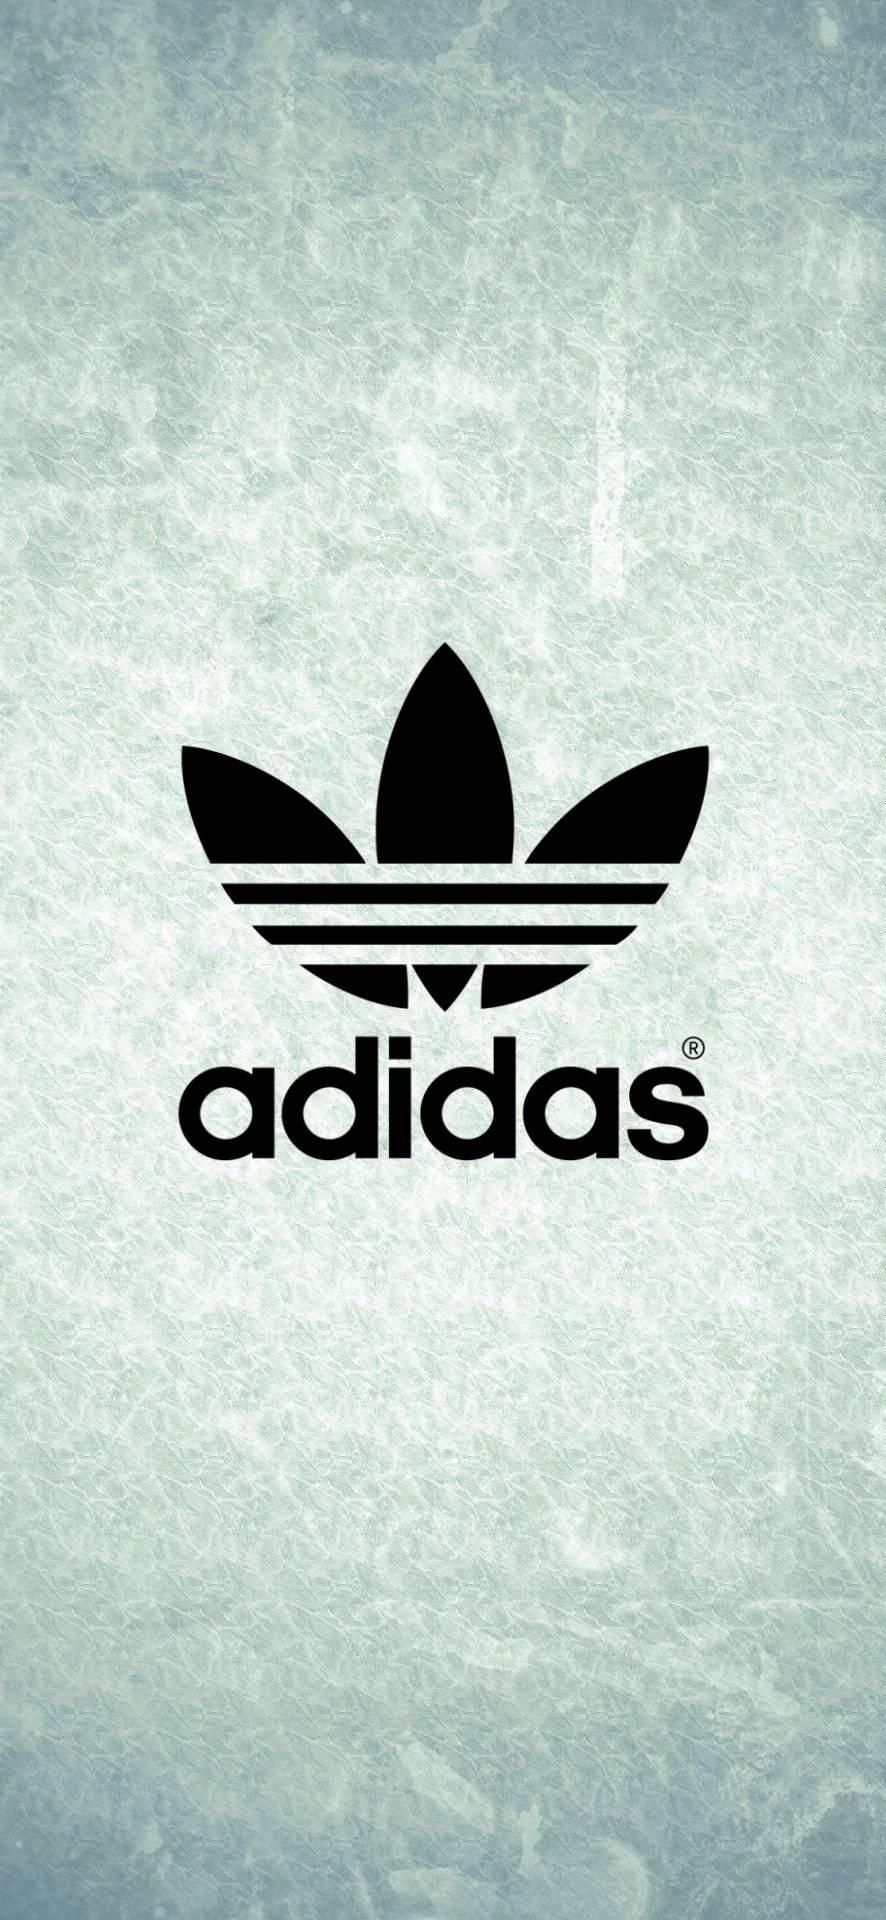 Adidas City Wallpapers - Top Free Adidas City Backgrounds - WallpaperAccess